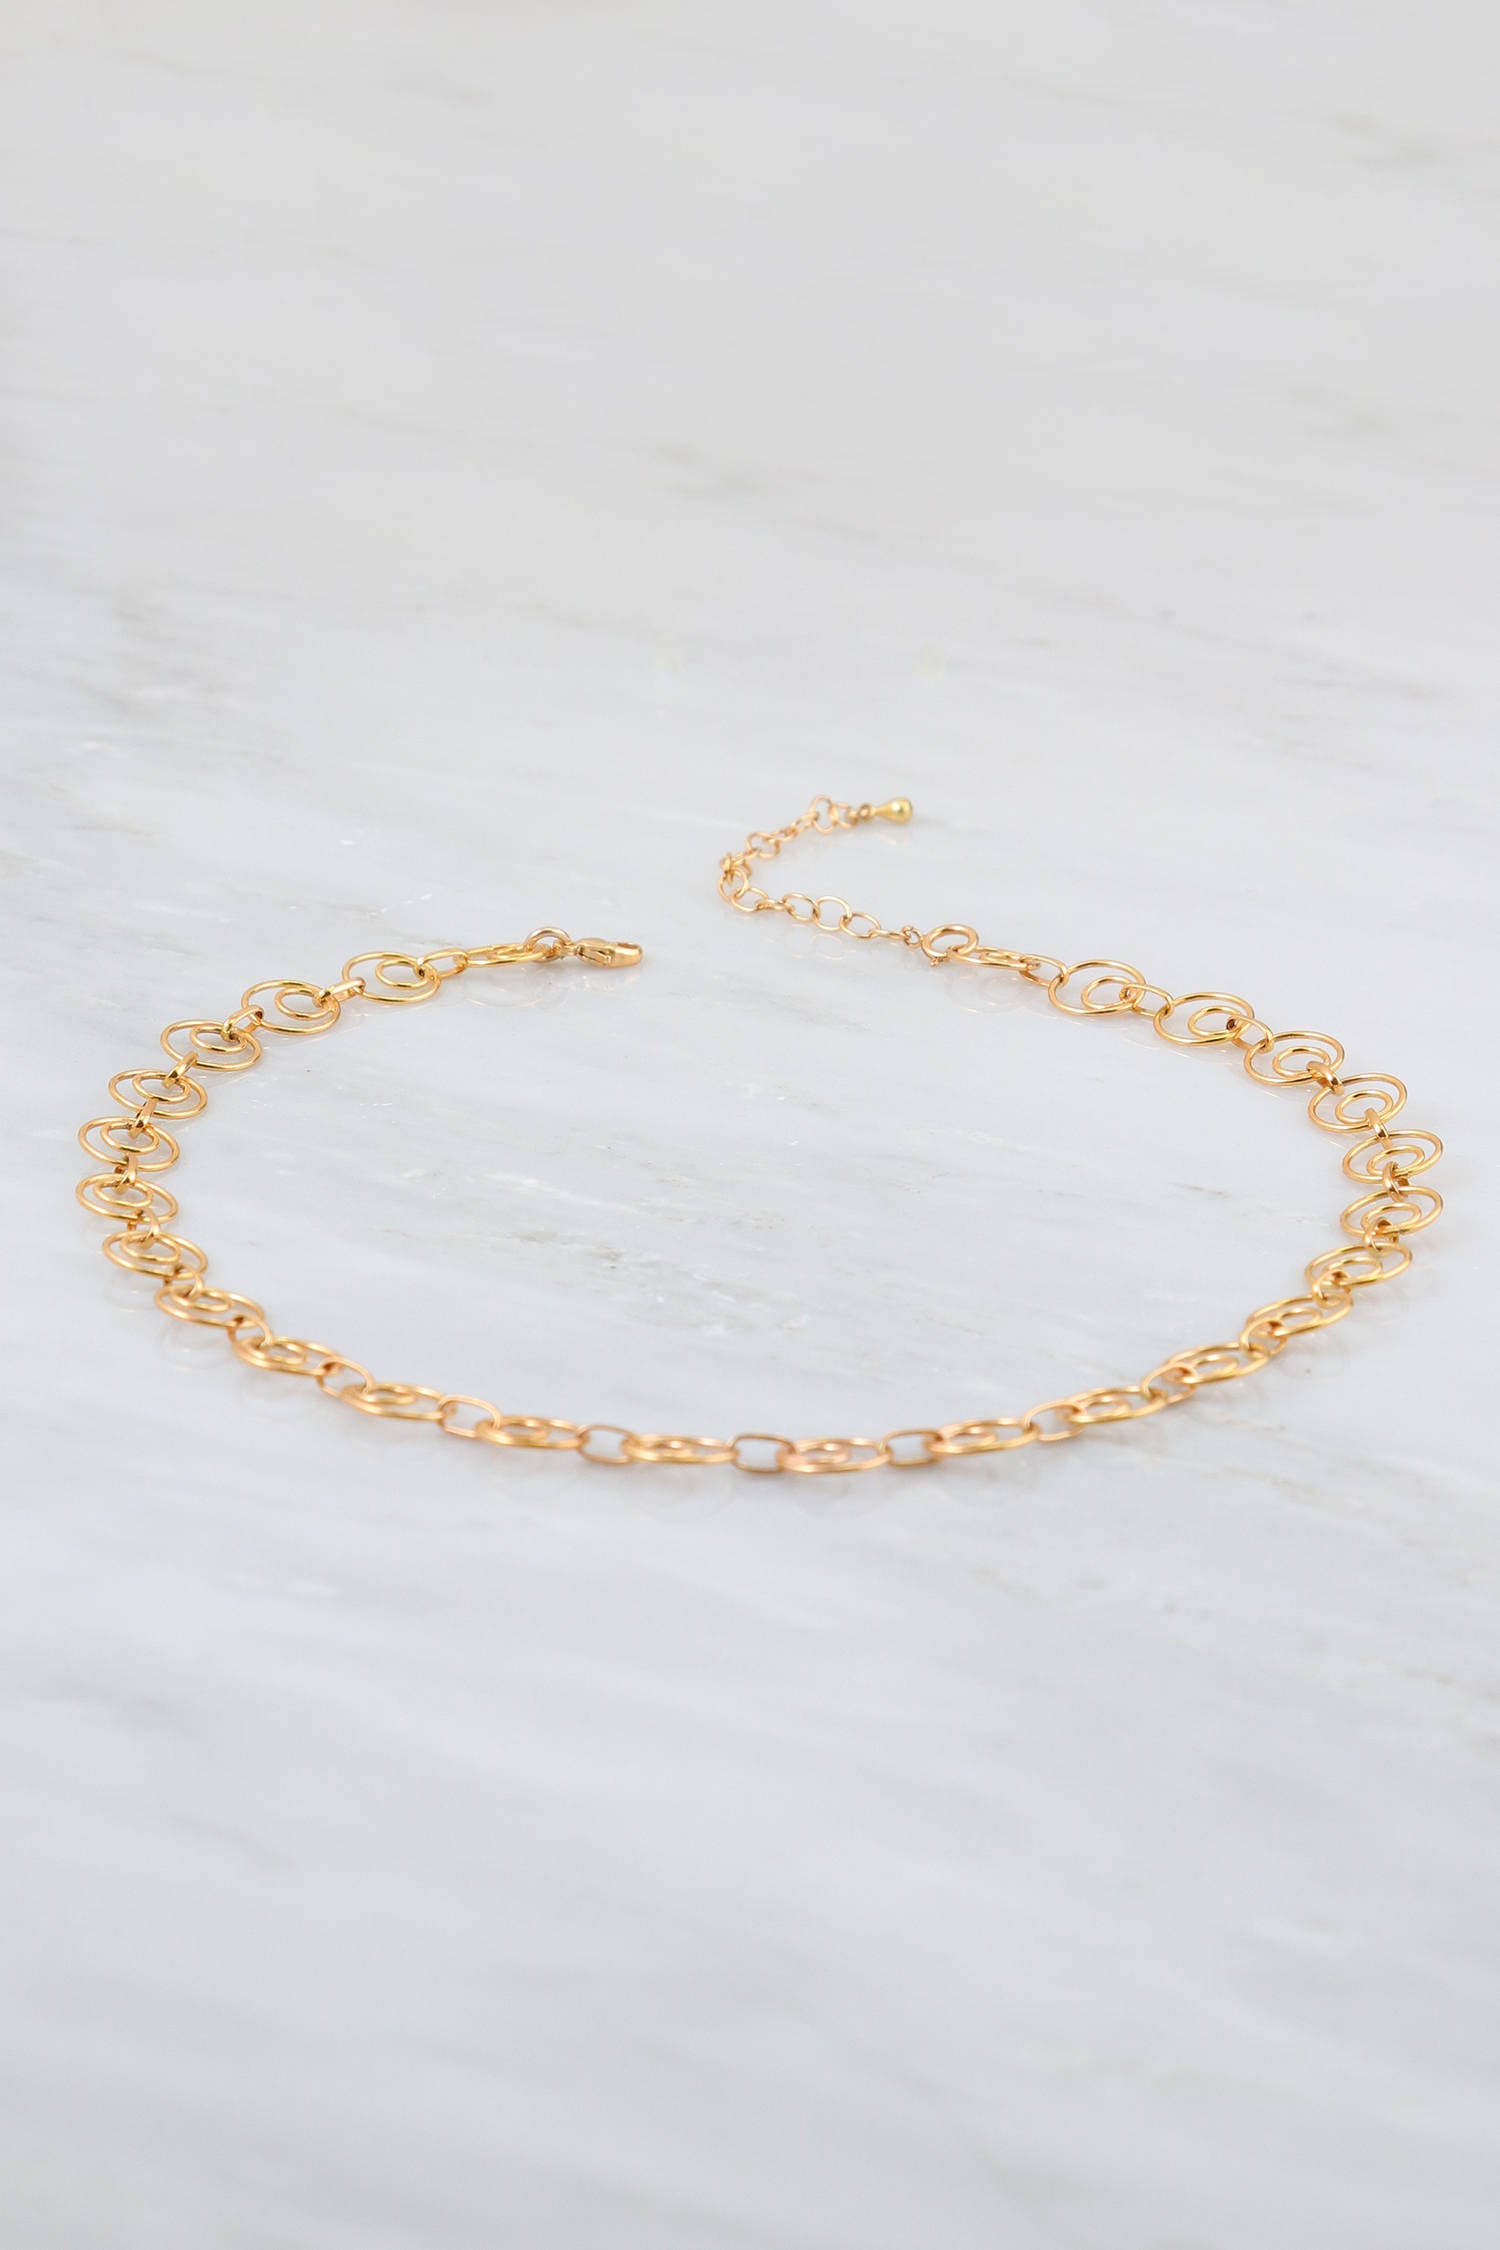 Buy 14k Gold Choker Necklace for Women, Layered Short Double Choker Necklace  Set, Dainty Modern Minimalist Jewelry Sterling Silver, Rose Gold Online in  India - Etsy